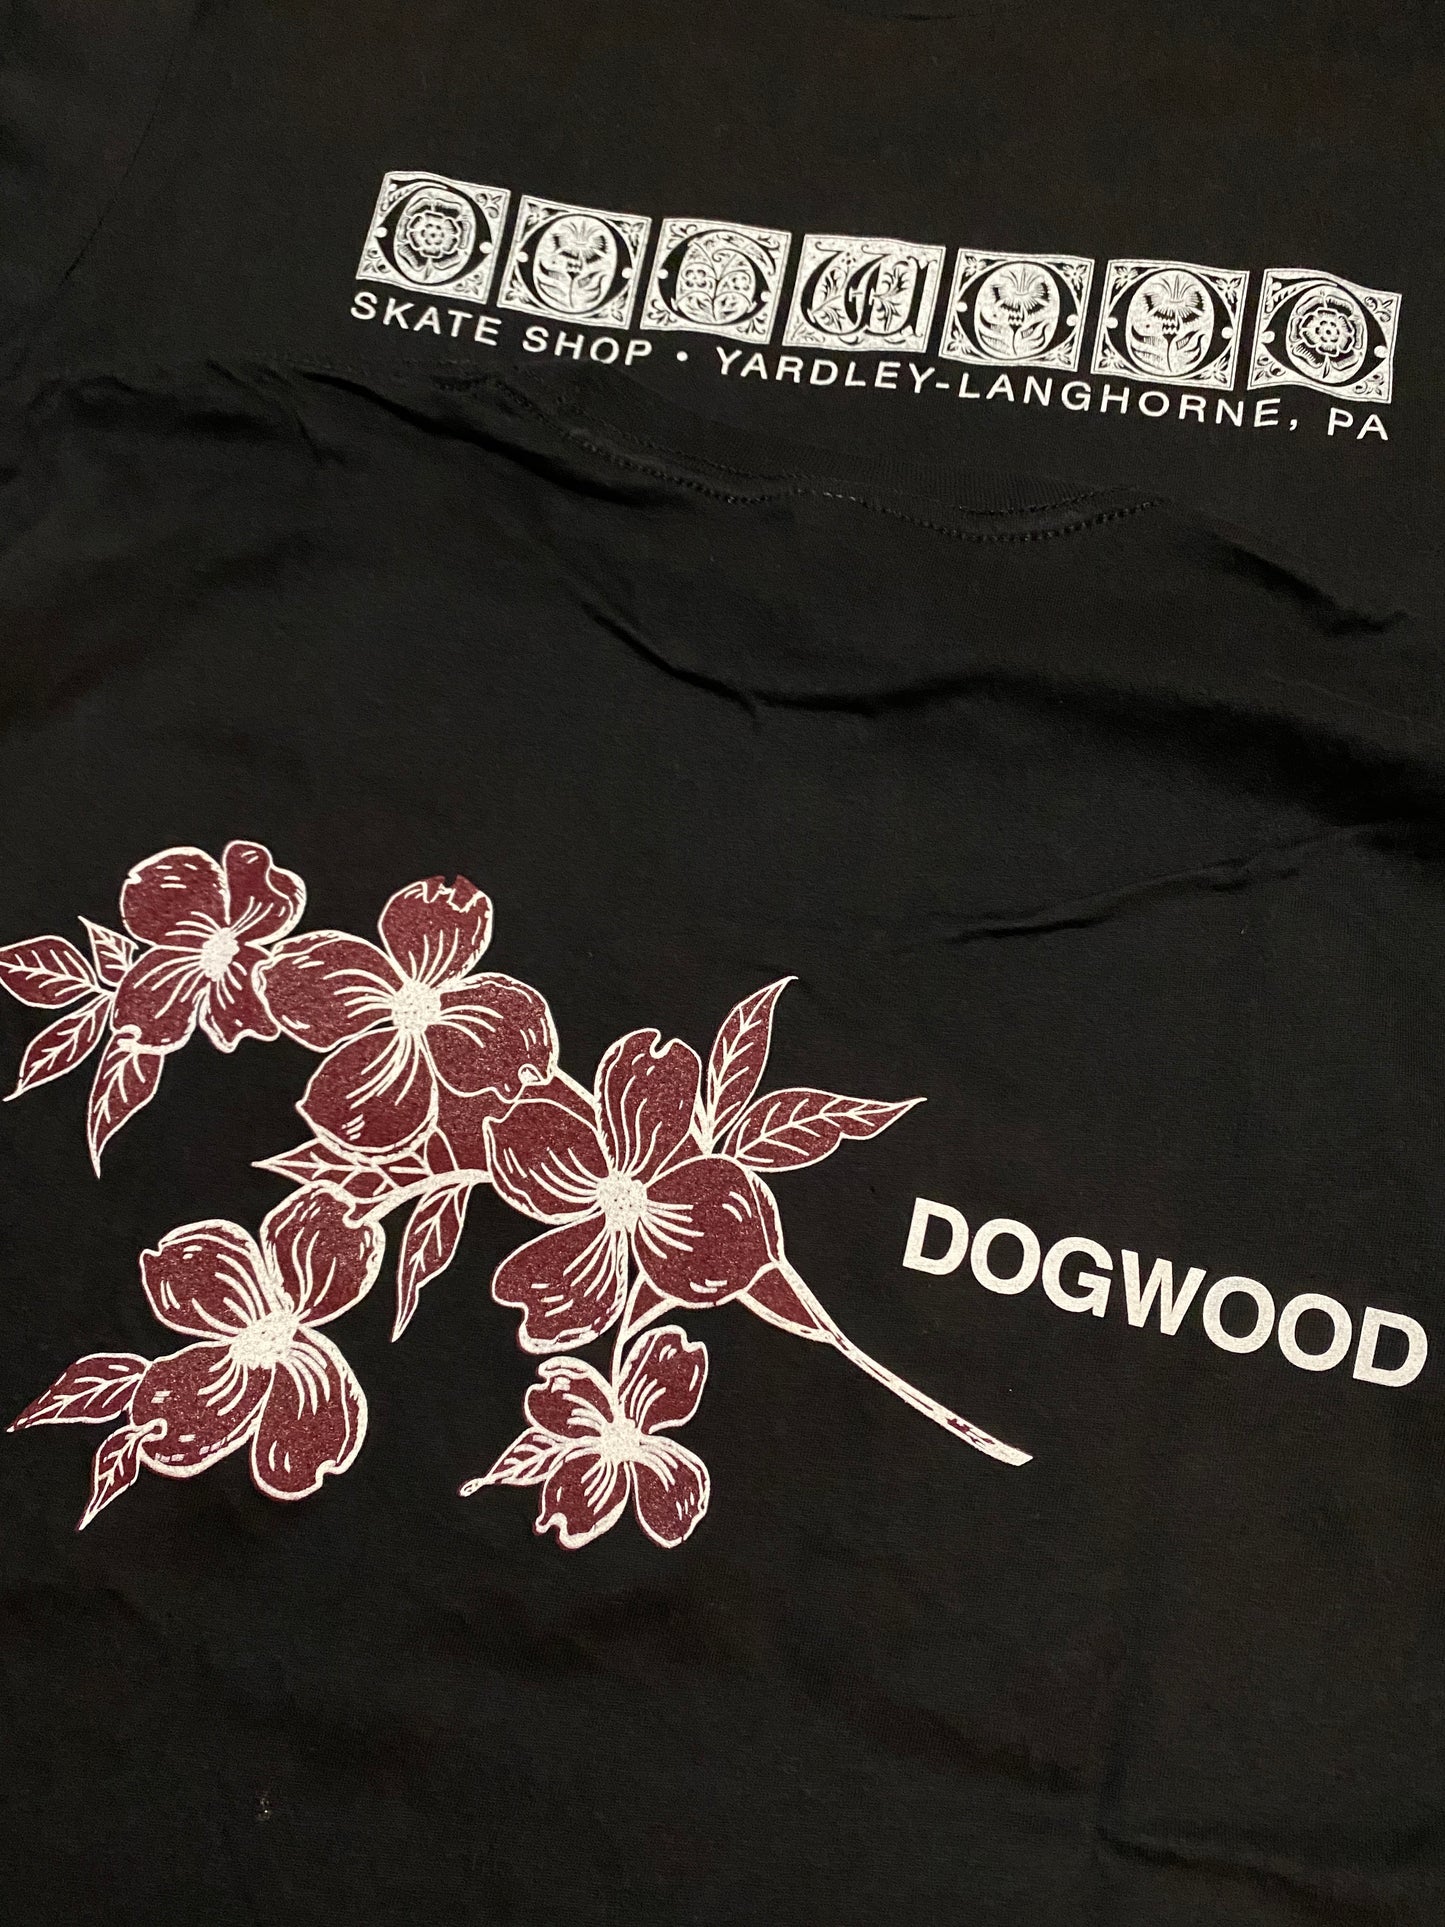 Flowers On South S/S Tee Shirt Blk (size options listed)